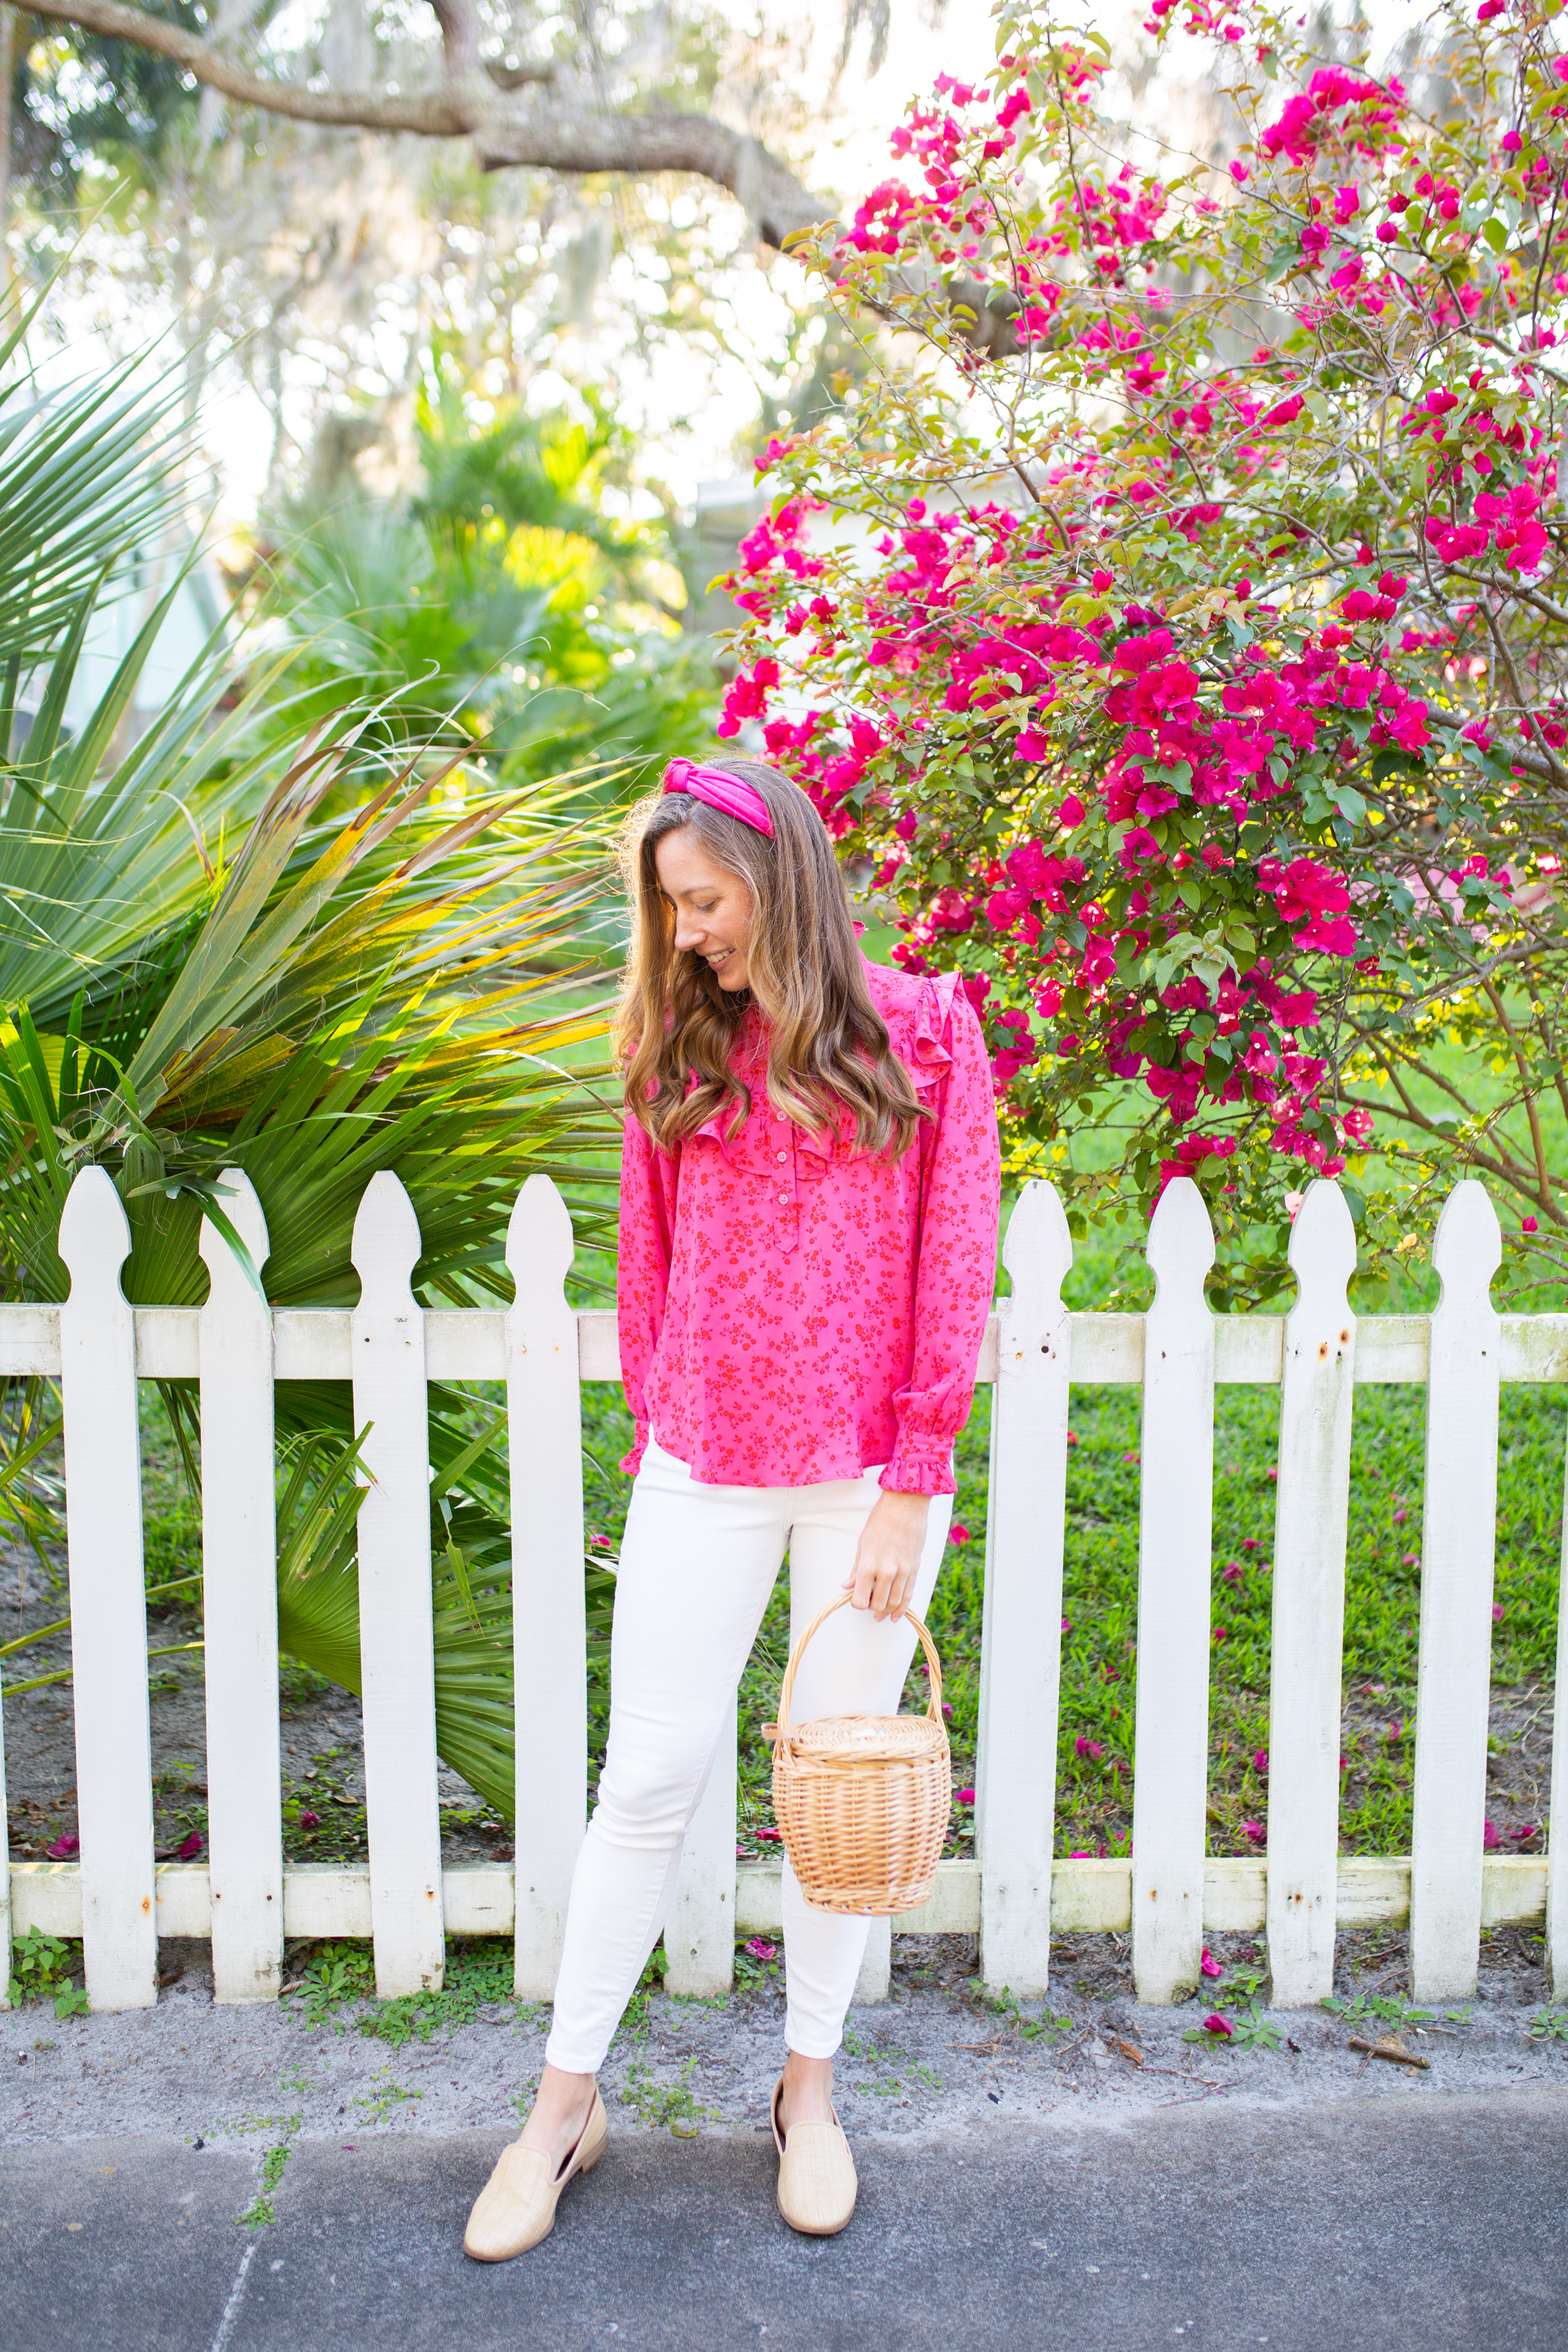 Floral Tops for Spring / Spring Tops for Women / Ruffle Top / Long Sleeve Blouse / White Jeans / Spring Outfit Inspiration / Floral Tops and Jeans / Floral Tops Outfit - Sunshine Style, A Florida Fashion blog by Katie